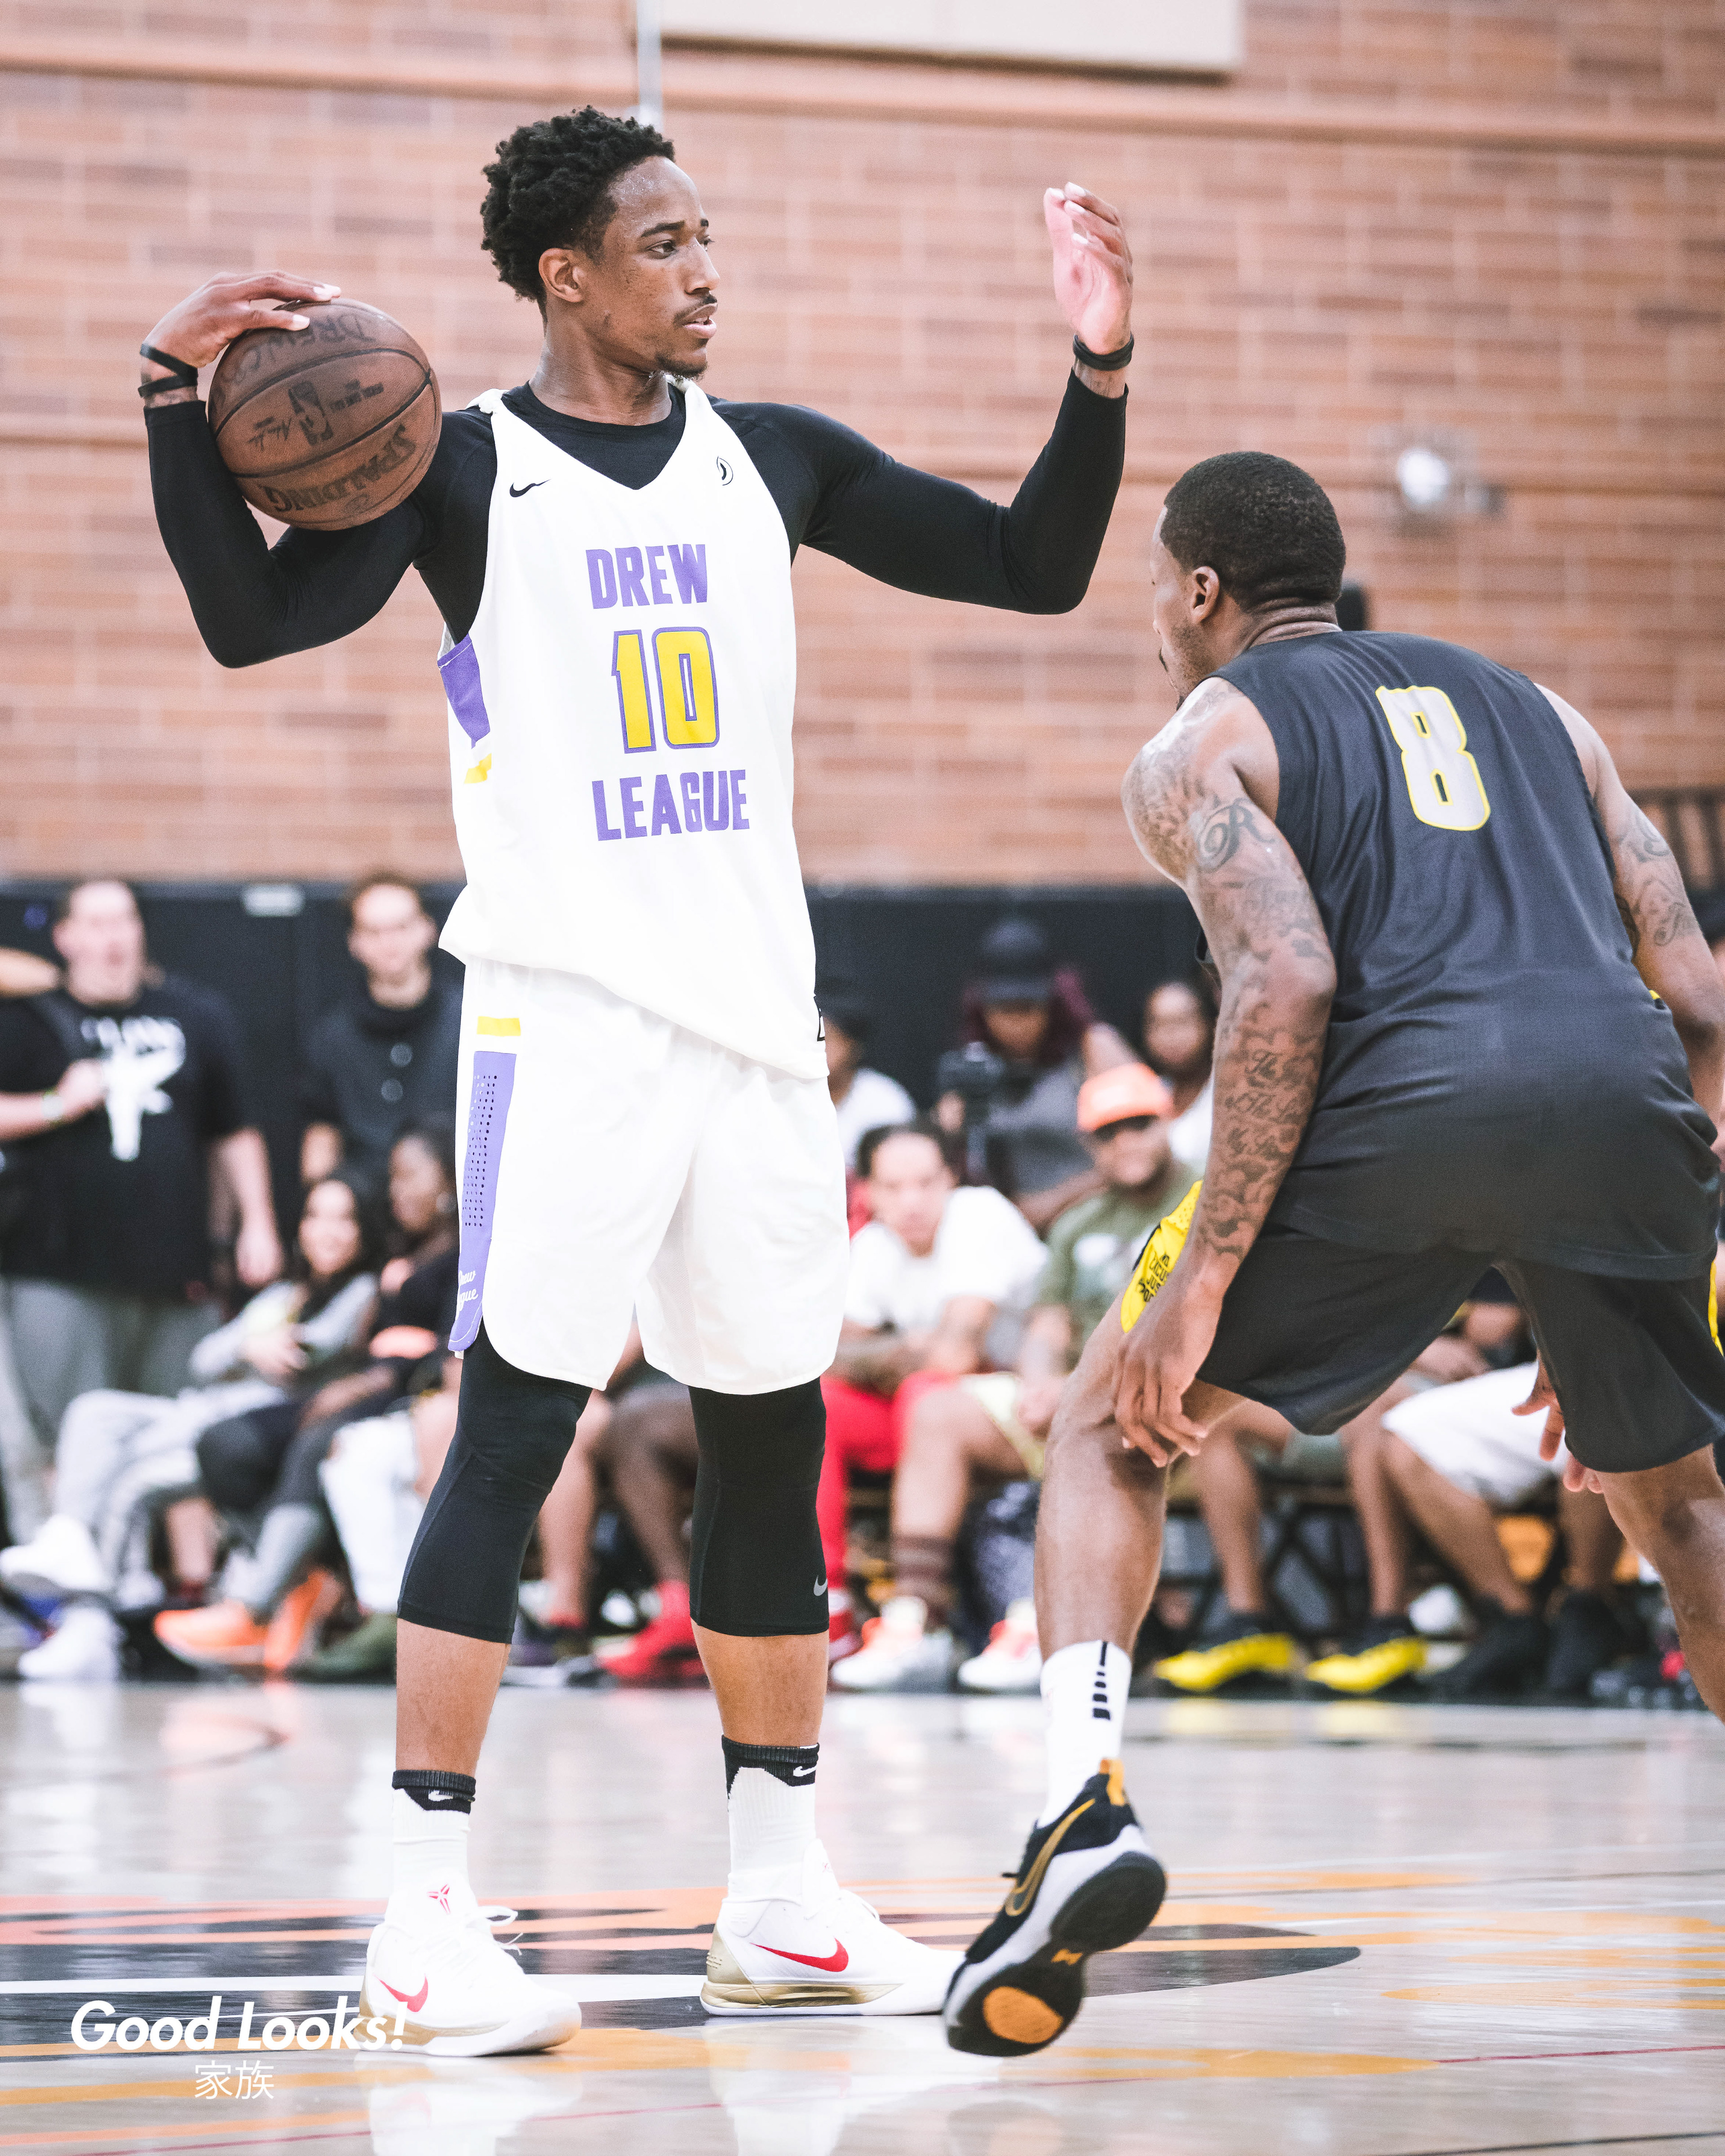 Shoes Worn by DeMar DeRozan in 2022 Drew League Game - Sports Illustrated  FanNation Kicks News, Analysis and More